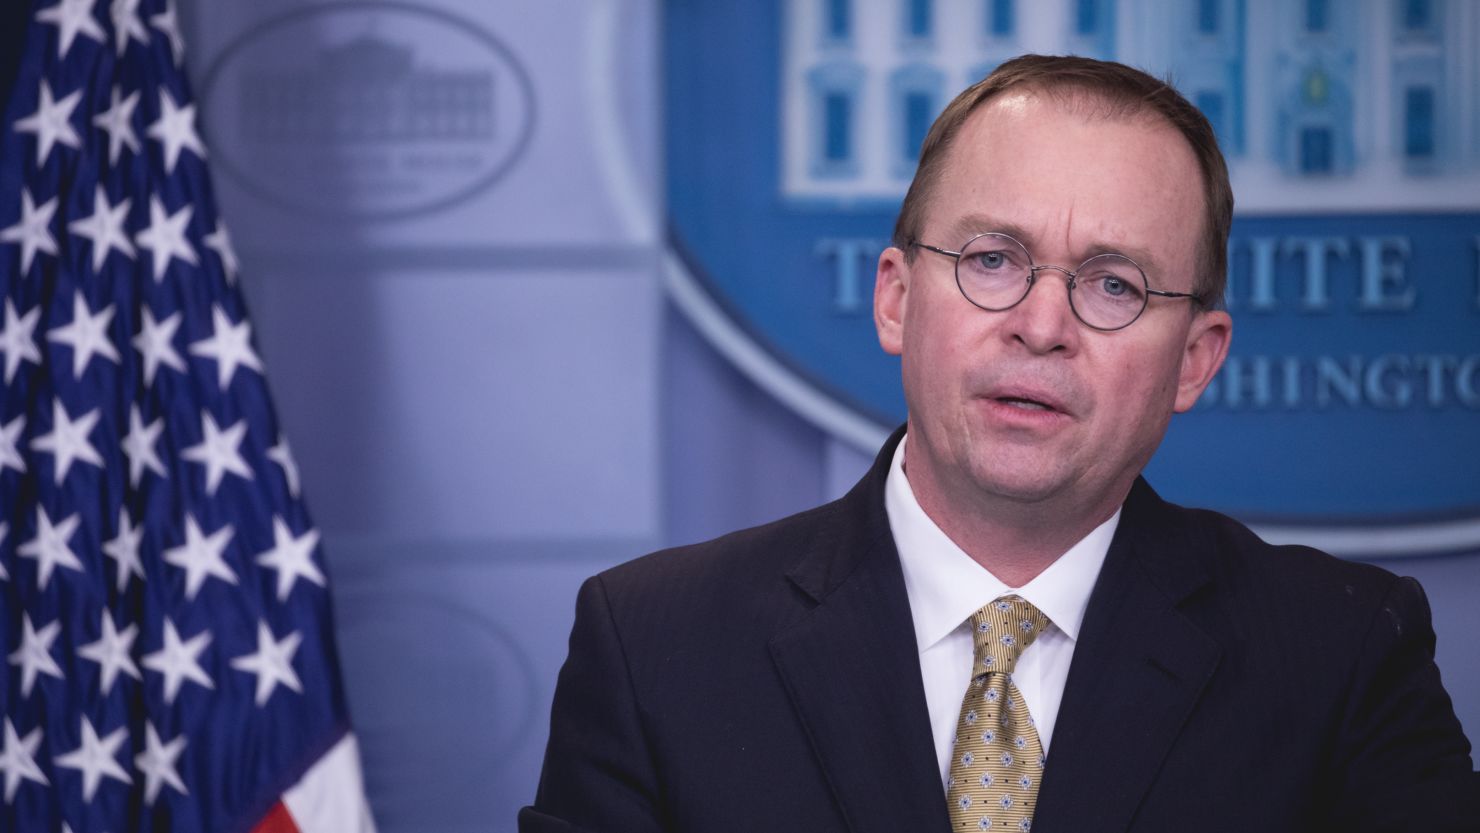 Office of Management and Budget Director Mick Mulvaney speaks to press during a briefing on the government shutdown, in the James S. Brady Press Briefing Room of the White House in Washington, D.C., on Saturday, January 20, 2018. 